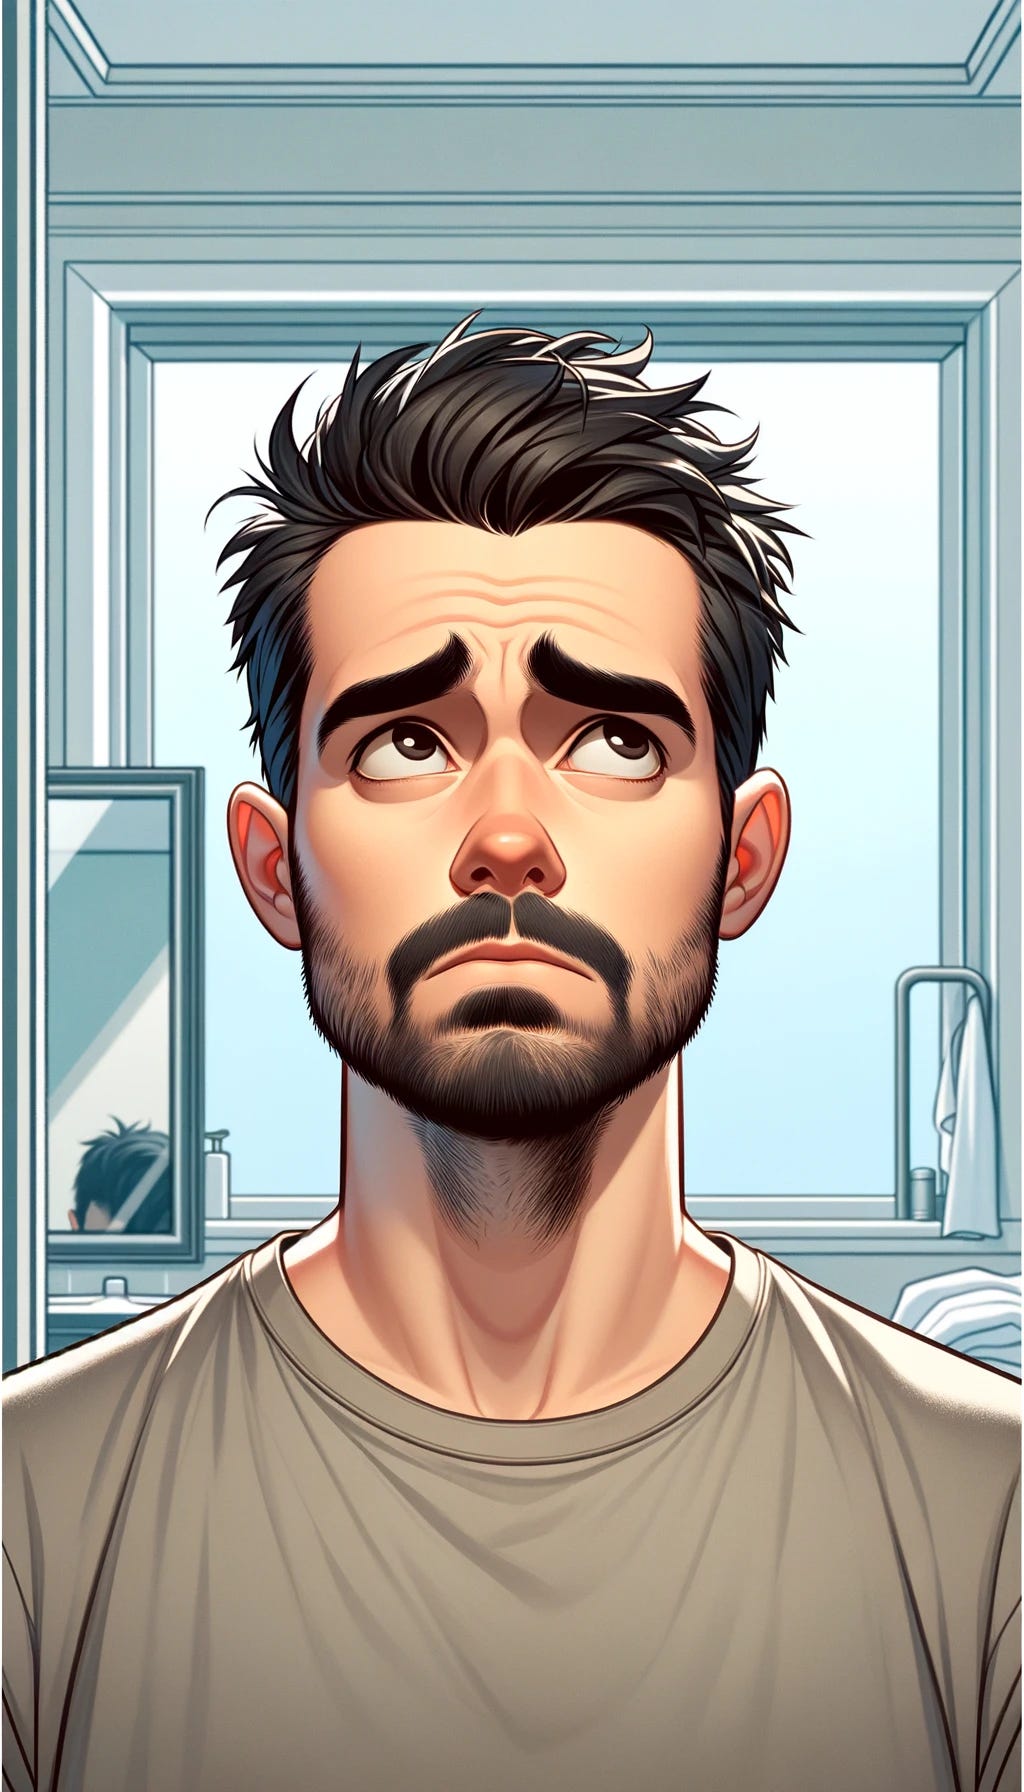 Create a realistic cartoon-style portrait of a man with short dark hair and a beard, based on the uploaded reference image. The man should have a slight tilt of his head upwards, with an expression of uncertainty on his face, as if he has just woken up and is standing in front of the bathroom mirror. He should be wearing a plain t-shirt to emphasize the casual, just-out-of-bed look. The background should be simple and resemble a bathroom interior to fit the narrative of the blog post, with elements like a mirror reflecting the image of the man. The mood should be pensive and slightly uncertain.